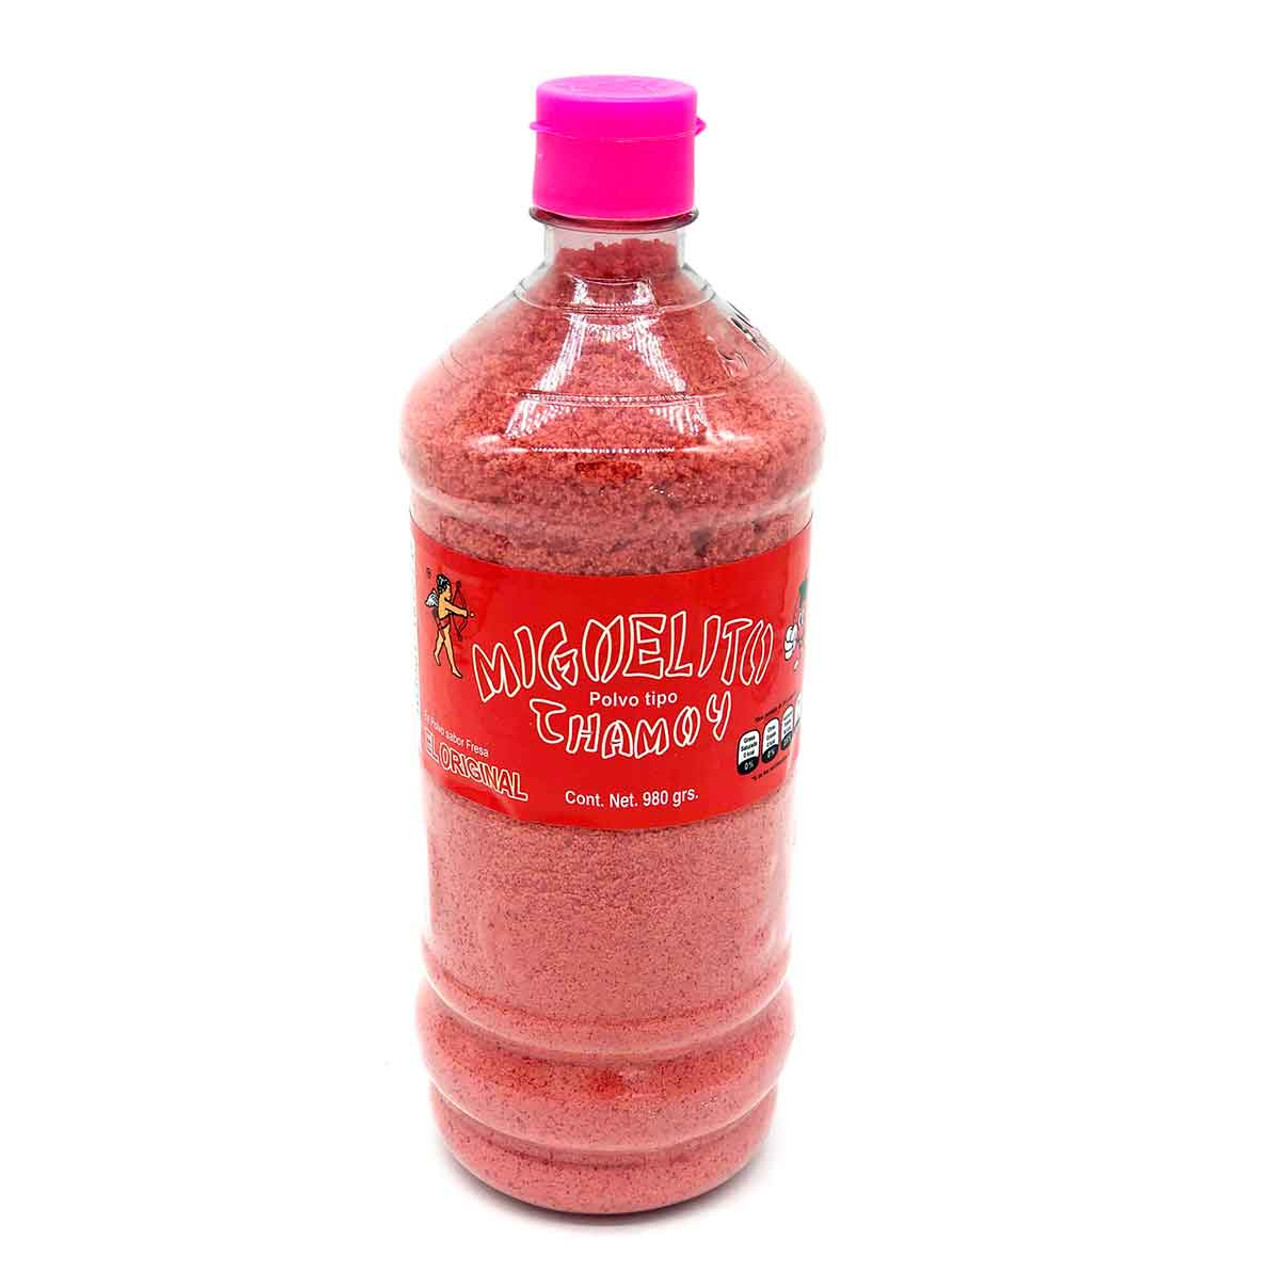 Bottles with 980 grams of delicious sugary, fruity and spicy powder flavored with strawberry essence, known as "Miguelito Powder".